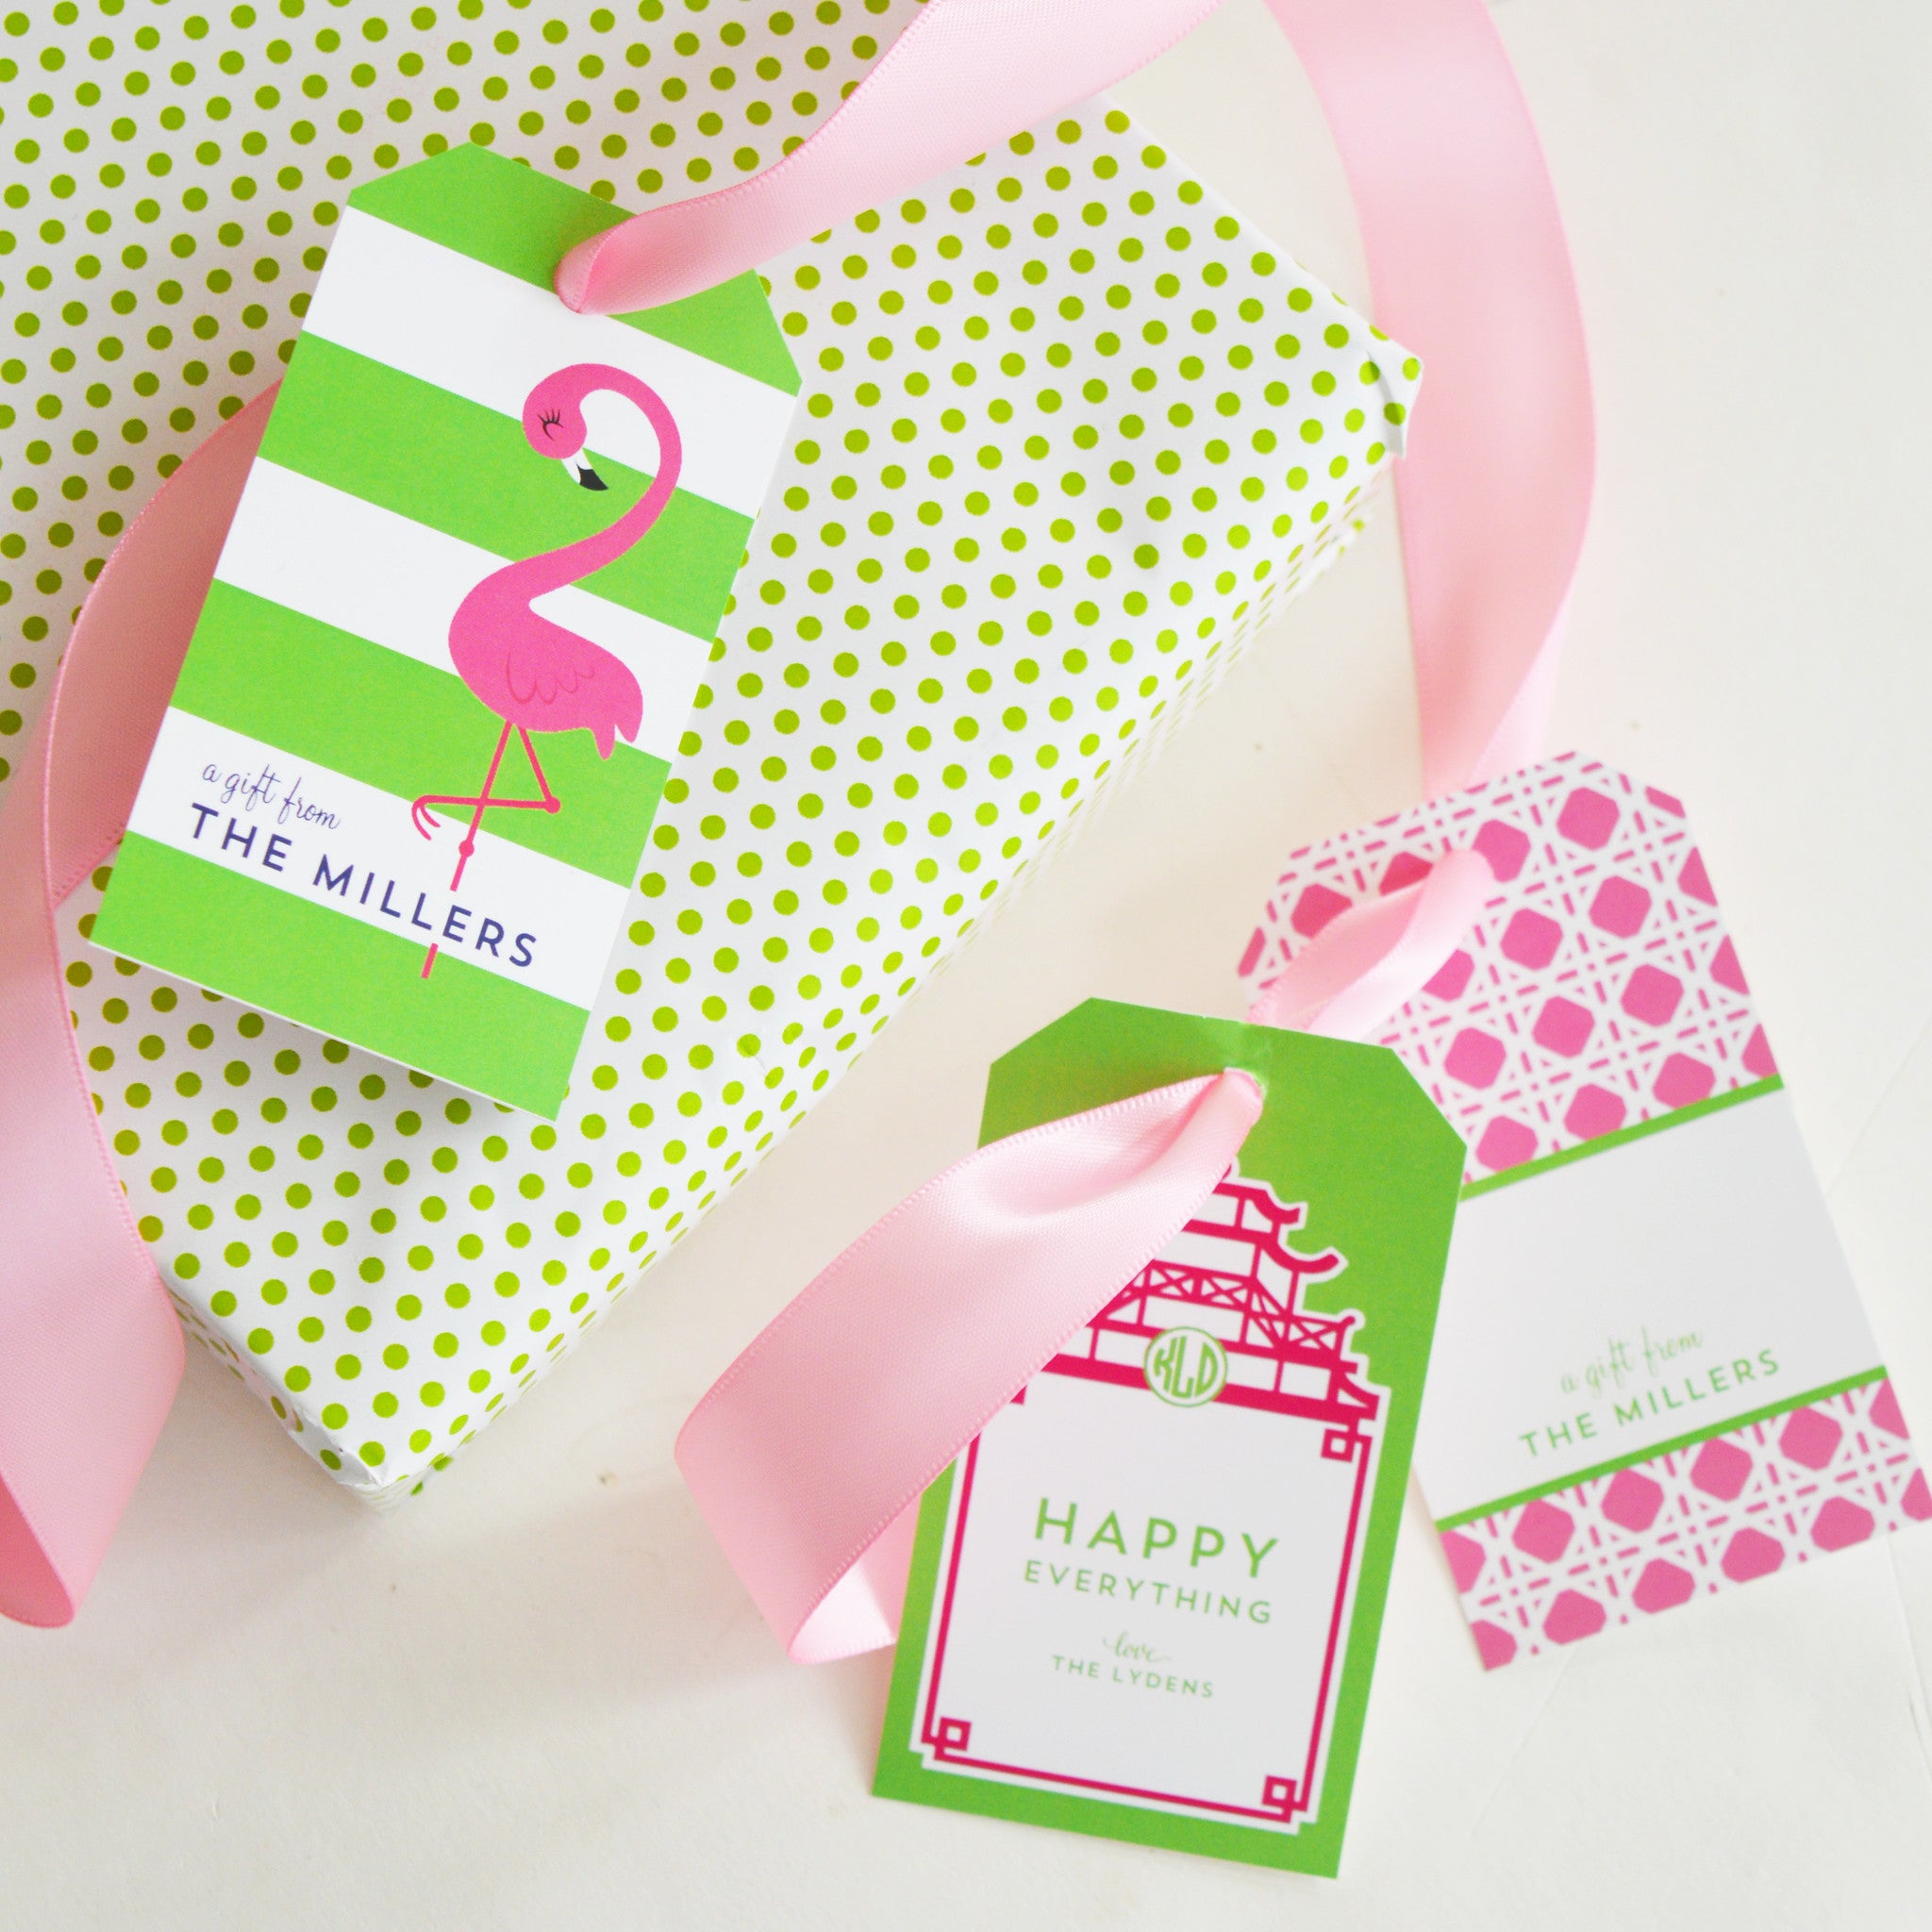 Personalized Gift Tags - Write Your Own